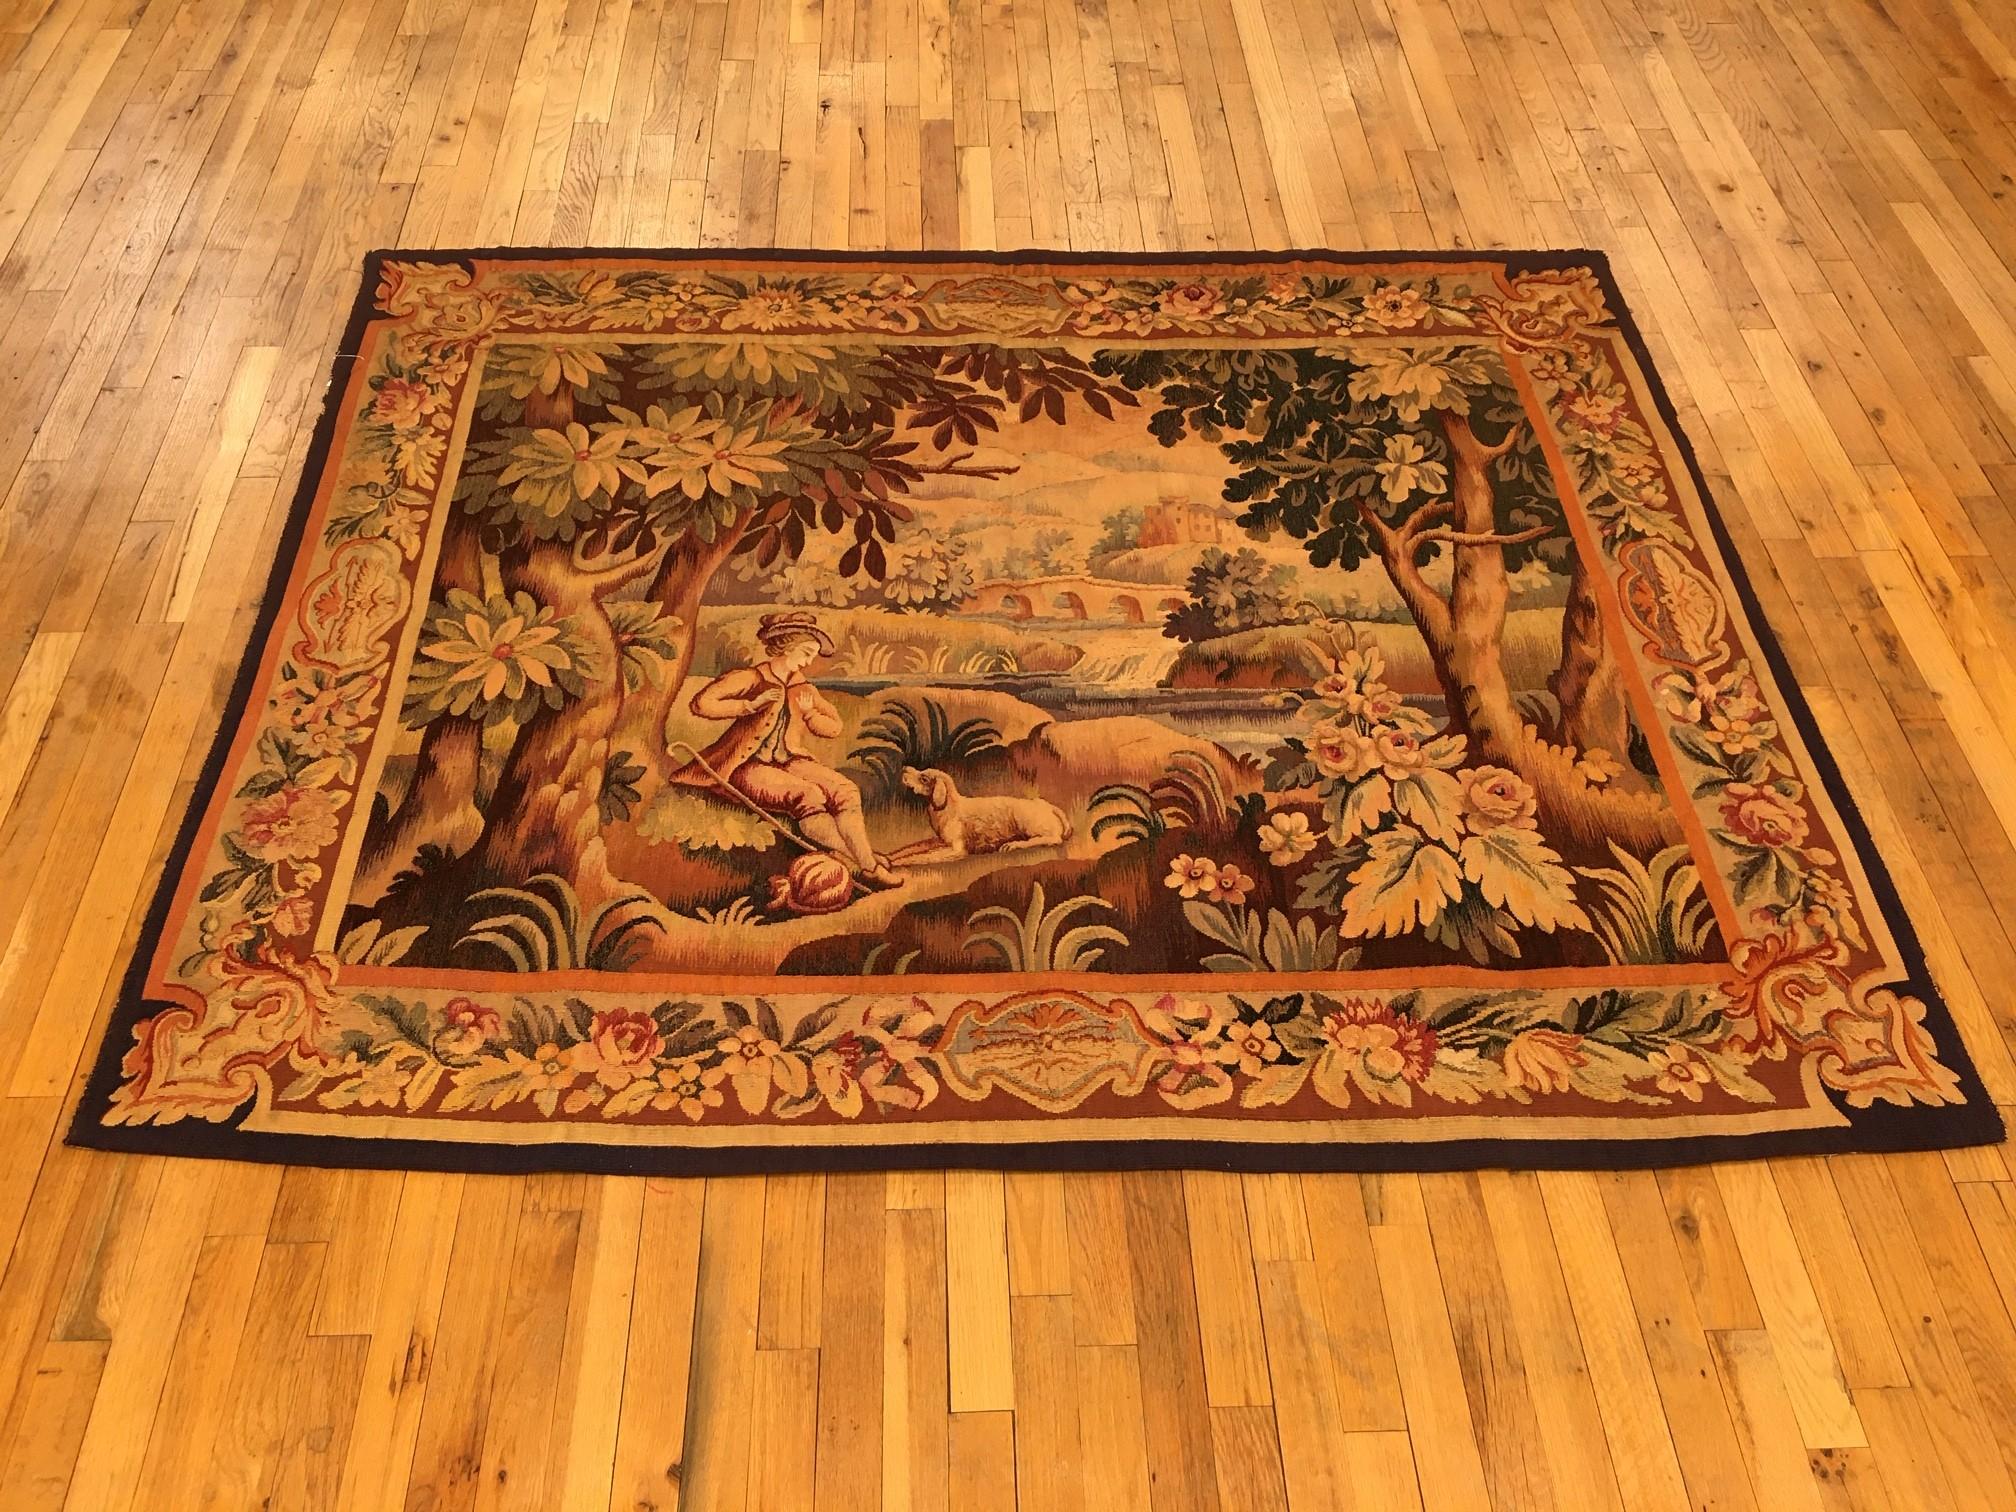 A French Aubusson rustic pastoral tapestry from the 19th century, centrally woven, depicting a young swain traveling with his faithful dog in an idyllic wooded area characterized by placidity and ethereal beauty. With flowering and acanthus plants